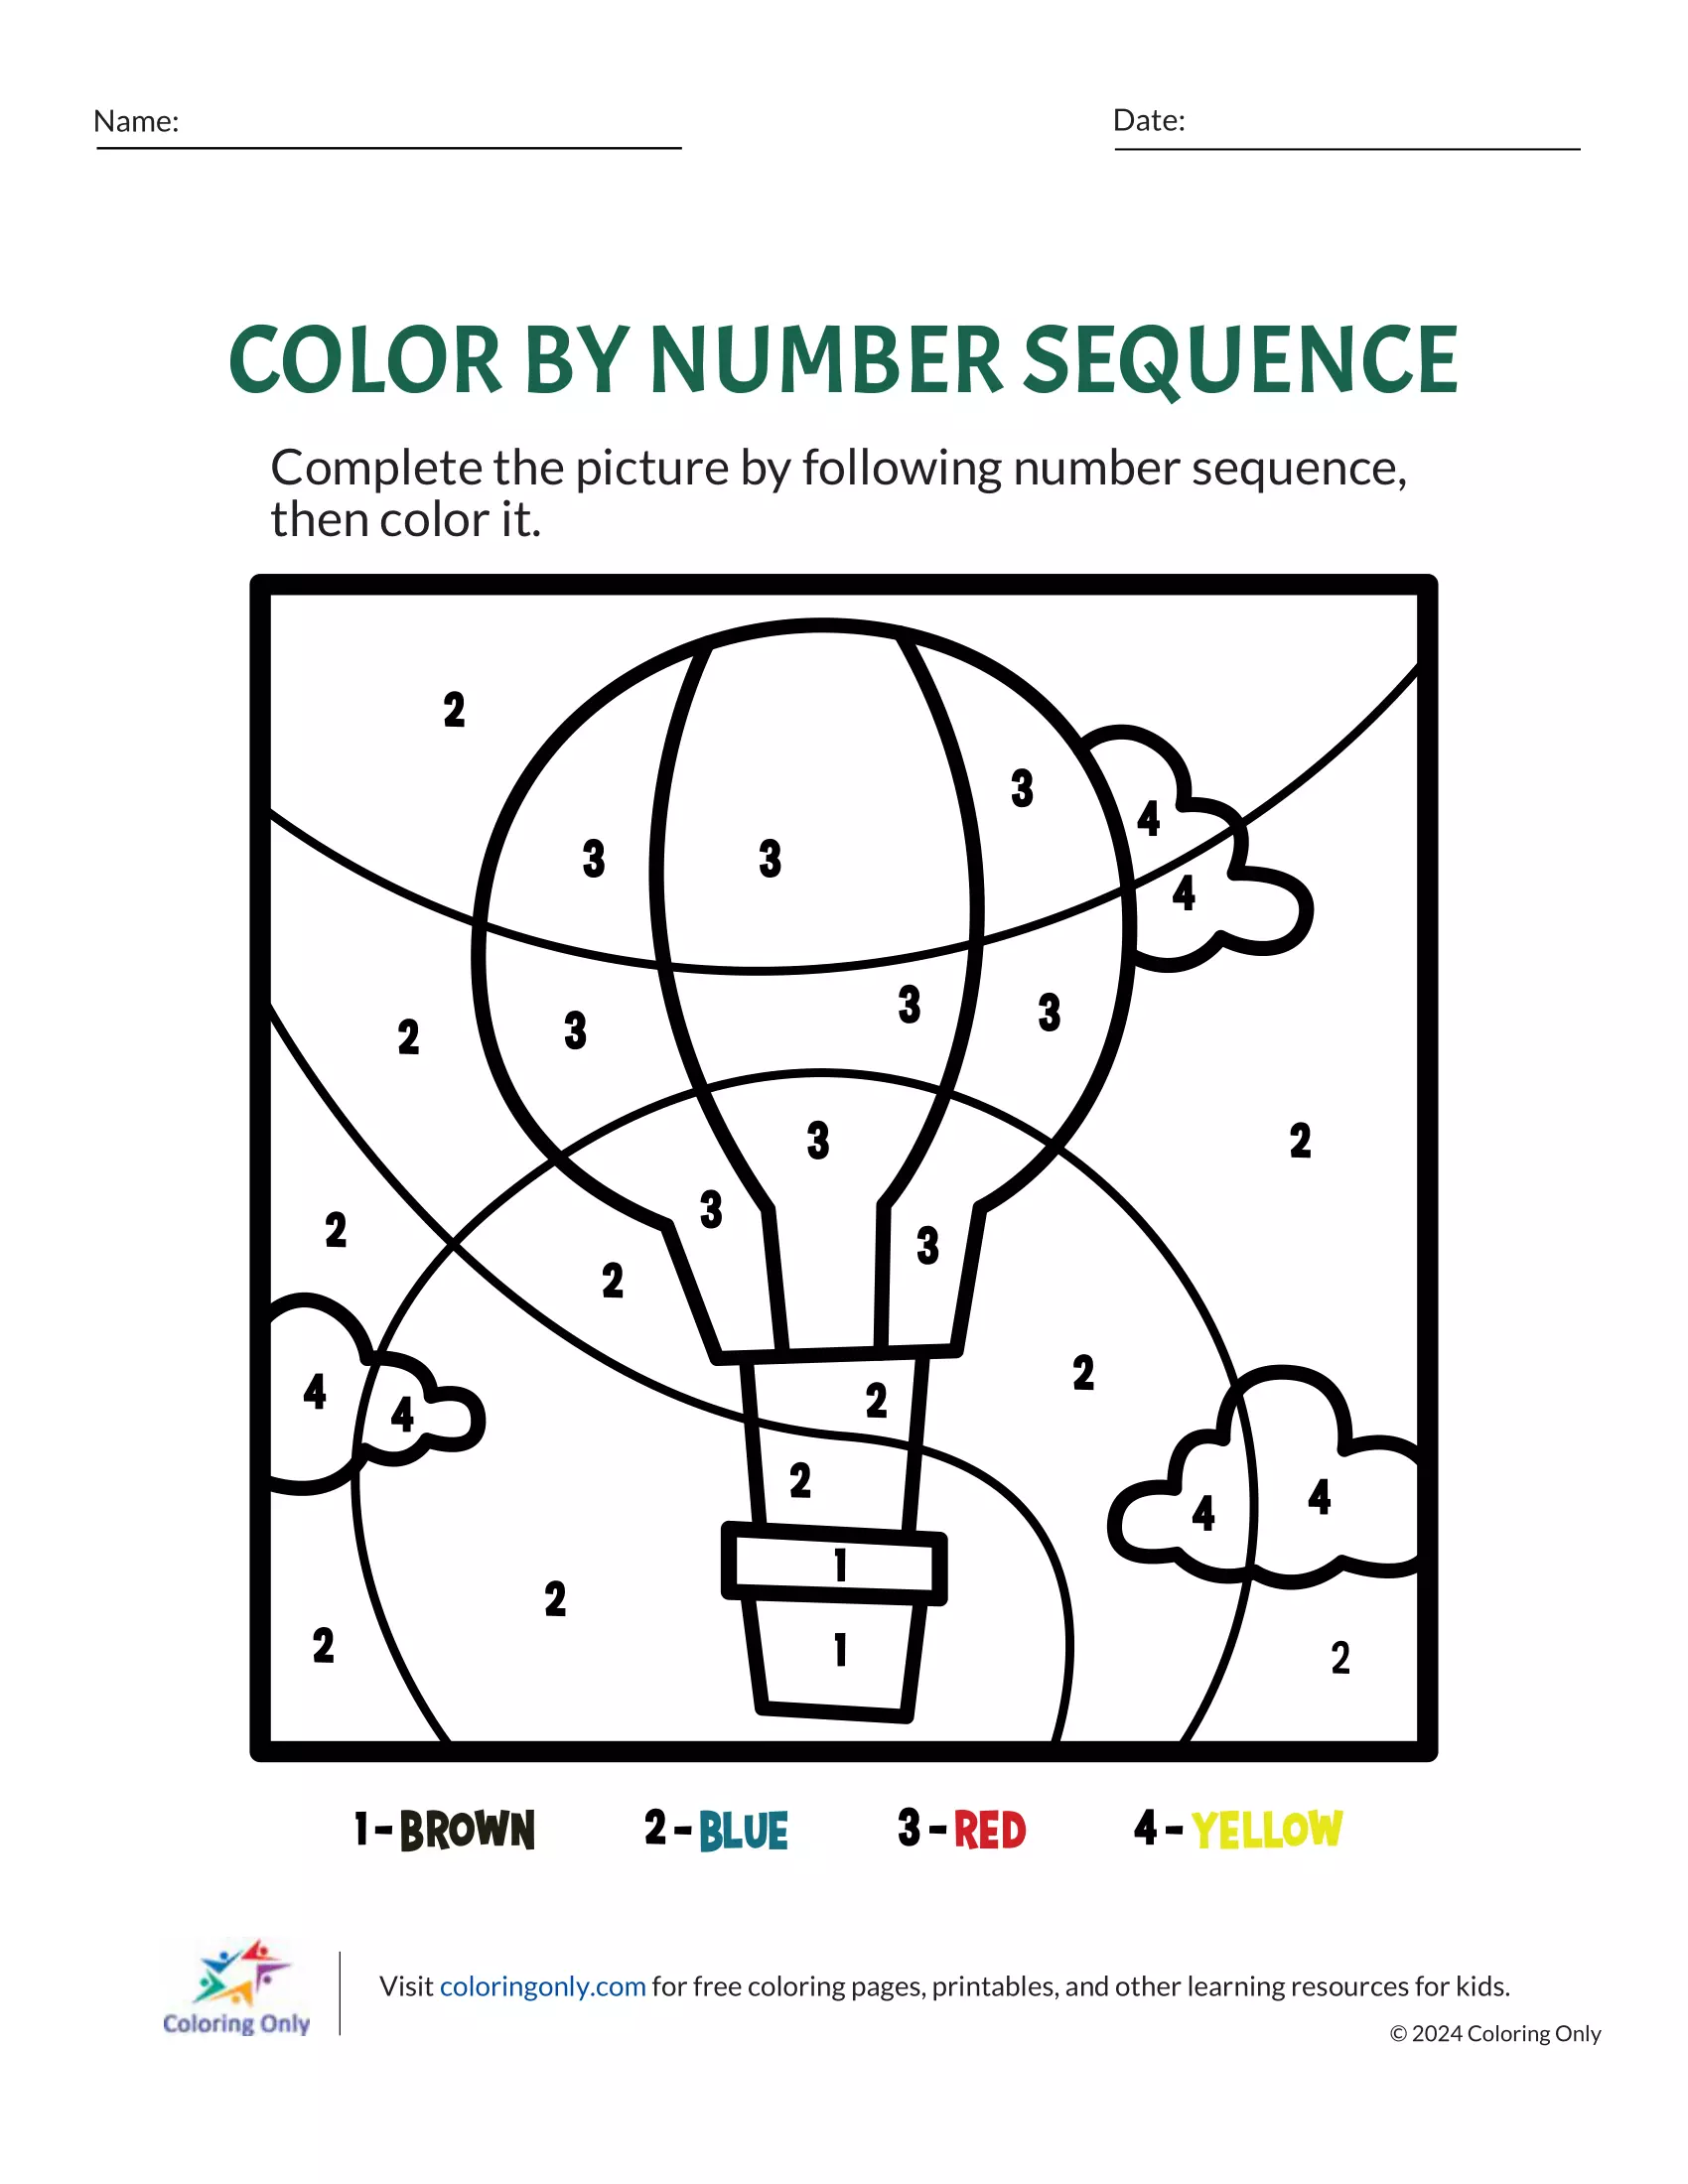 COLOR BY NUMBER SEQUENCE Free Printable Worksheet